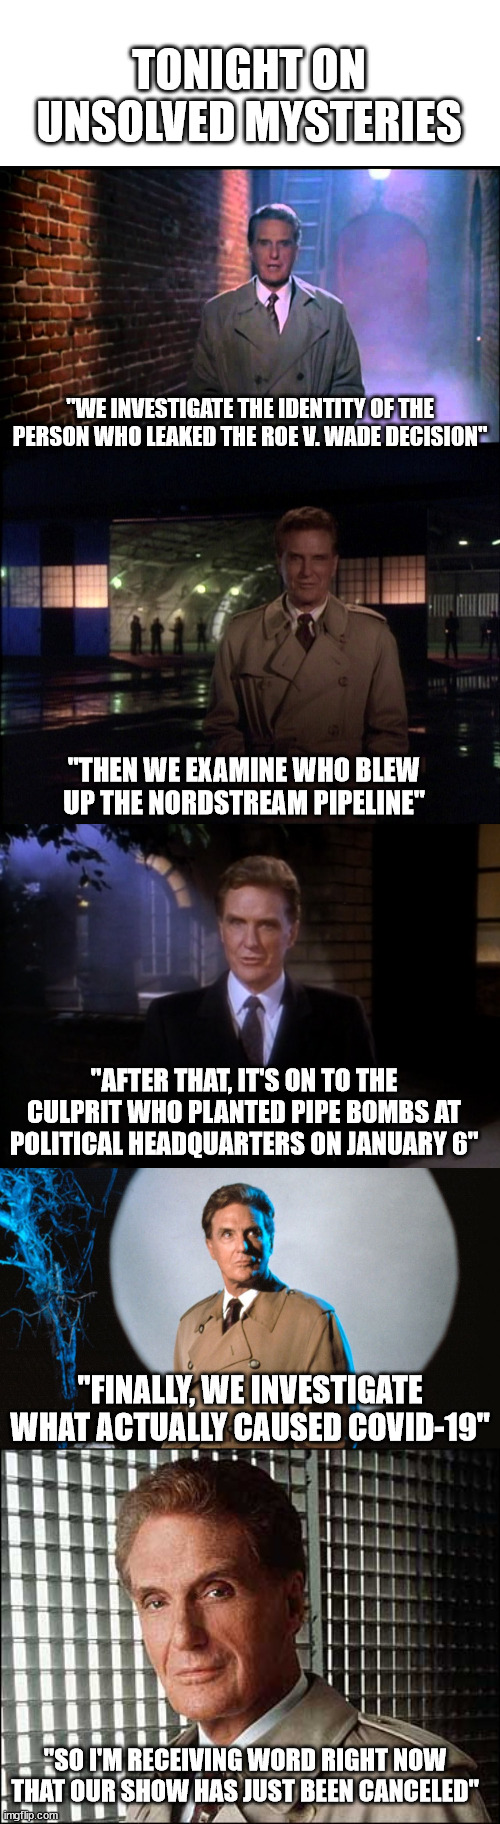 TONIGHT ON UNSOLVED MYSTERIES; "WE INVESTIGATE THE IDENTITY OF THE PERSON WHO LEAKED THE ROE V. WADE DECISION"; "THEN WE EXAMINE WHO BLEW UP THE NORDSTREAM PIPELINE"; "AFTER THAT, IT'S ON TO THE CULPRIT WHO PLANTED PIPE BOMBS AT POLITICAL HEADQUARTERS ON JANUARY 6"; "FINALLY, WE INVESTIGATE WHAT ACTUALLY CAUSED COVID-19"; "SO I'M RECEIVING WORD RIGHT NOW THAT OUR SHOW HAS JUST BEEN CANCELED" | image tagged in unsolved mysteries,unsolved mysteries with robert stack,tonight on unsolved mysteries,robert stack | made w/ Imgflip meme maker